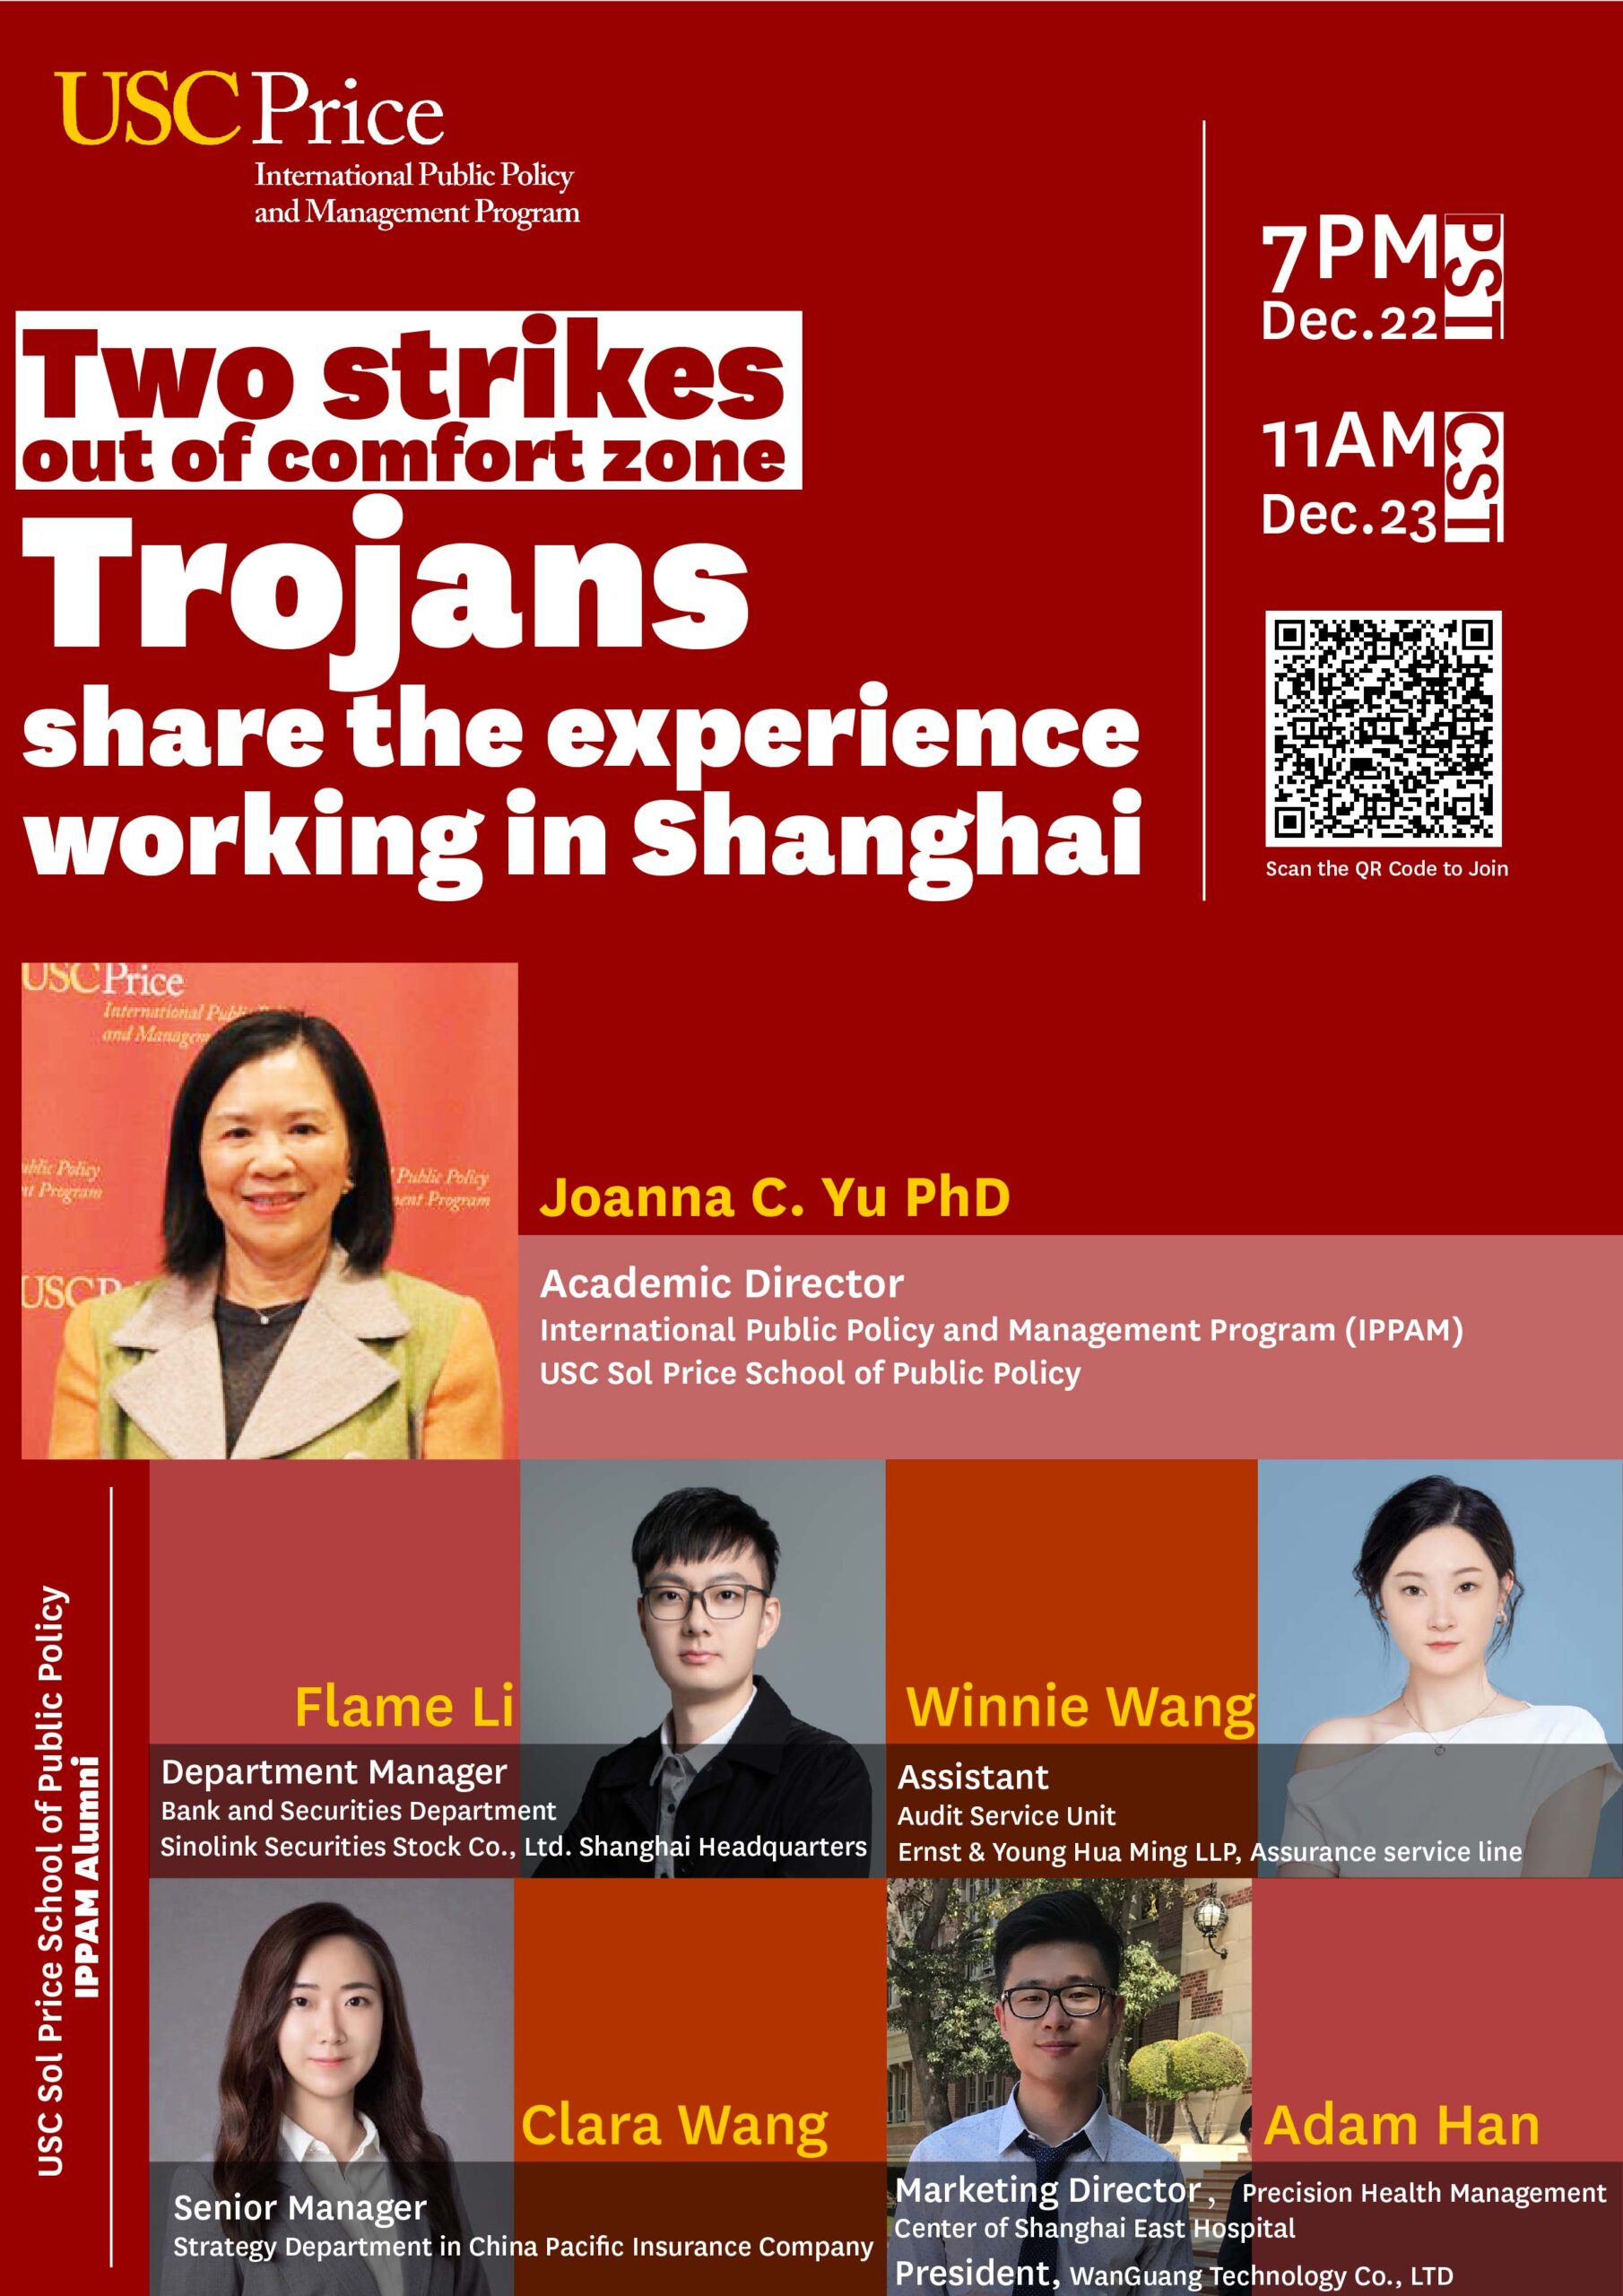 Two strikes out of comfort zone, Trojans share the experience working in Shanghai